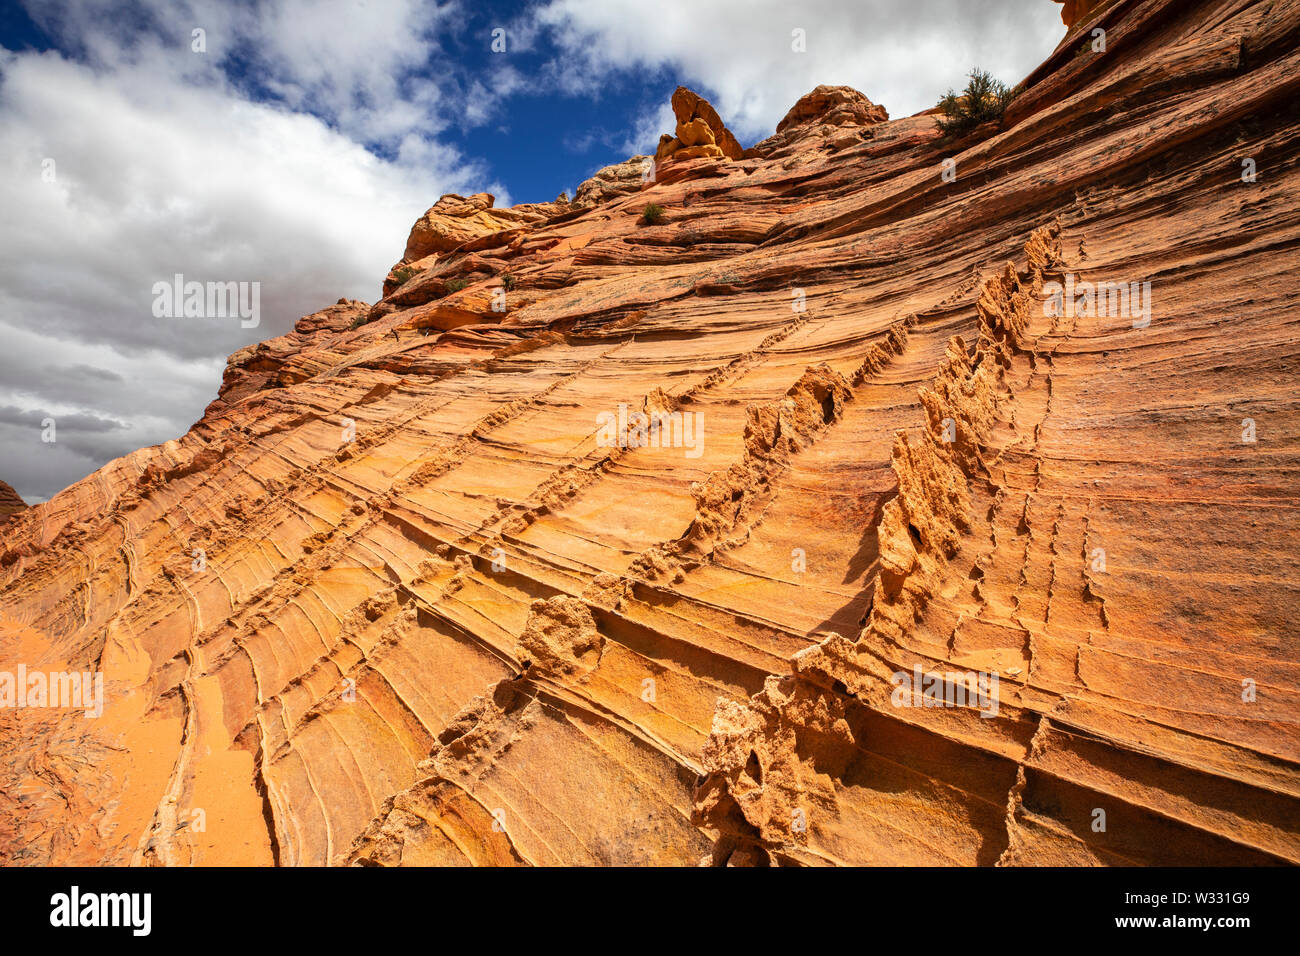 Sandstone fins at Coyote Buttes South, Arizona, United States of America Stock Photo